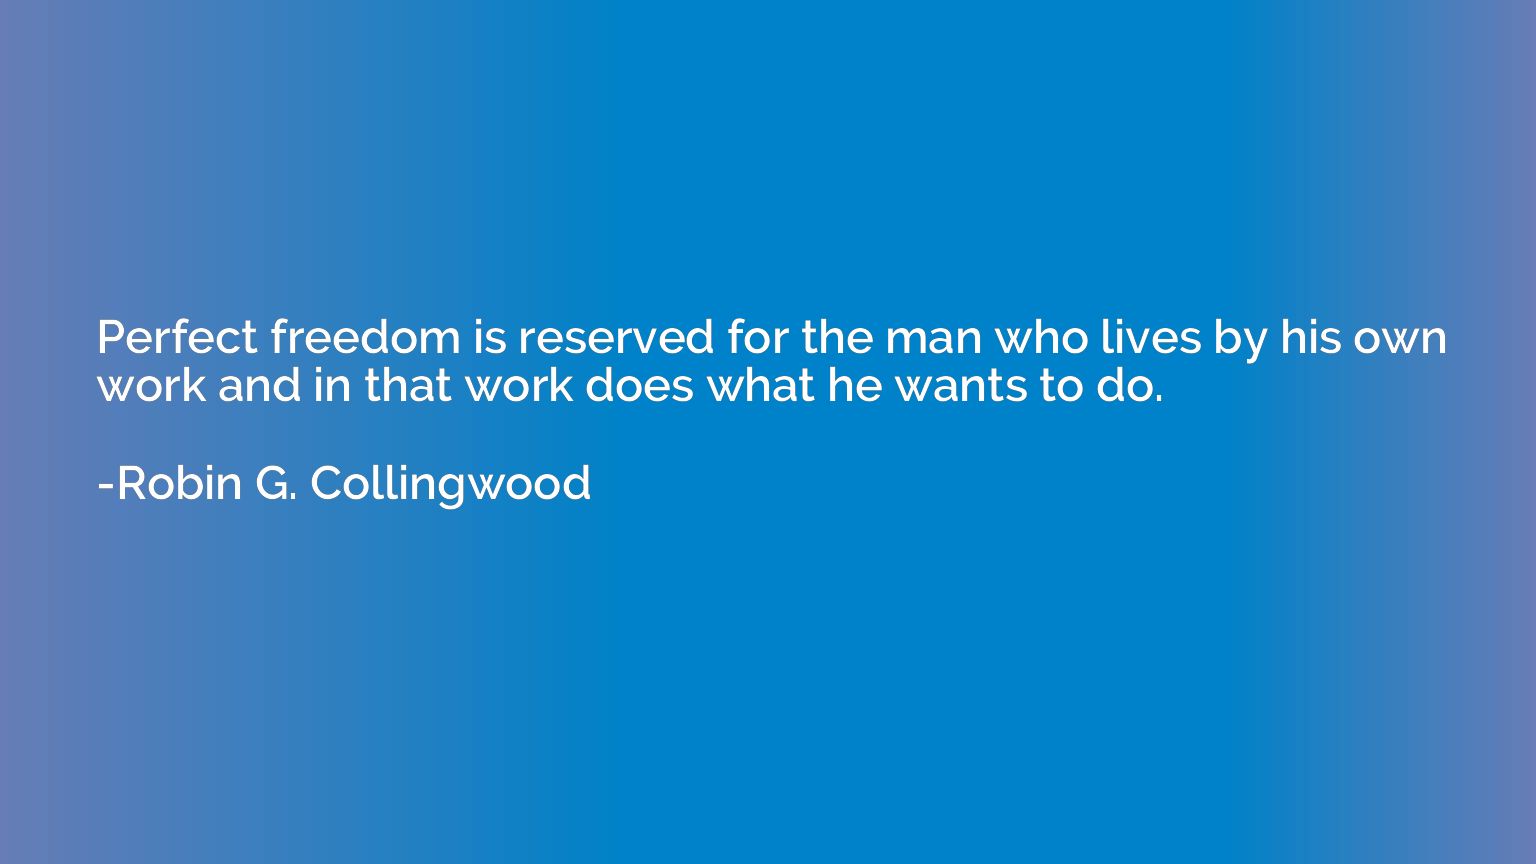 Perfect freedom is reserved for the man who lives by his own